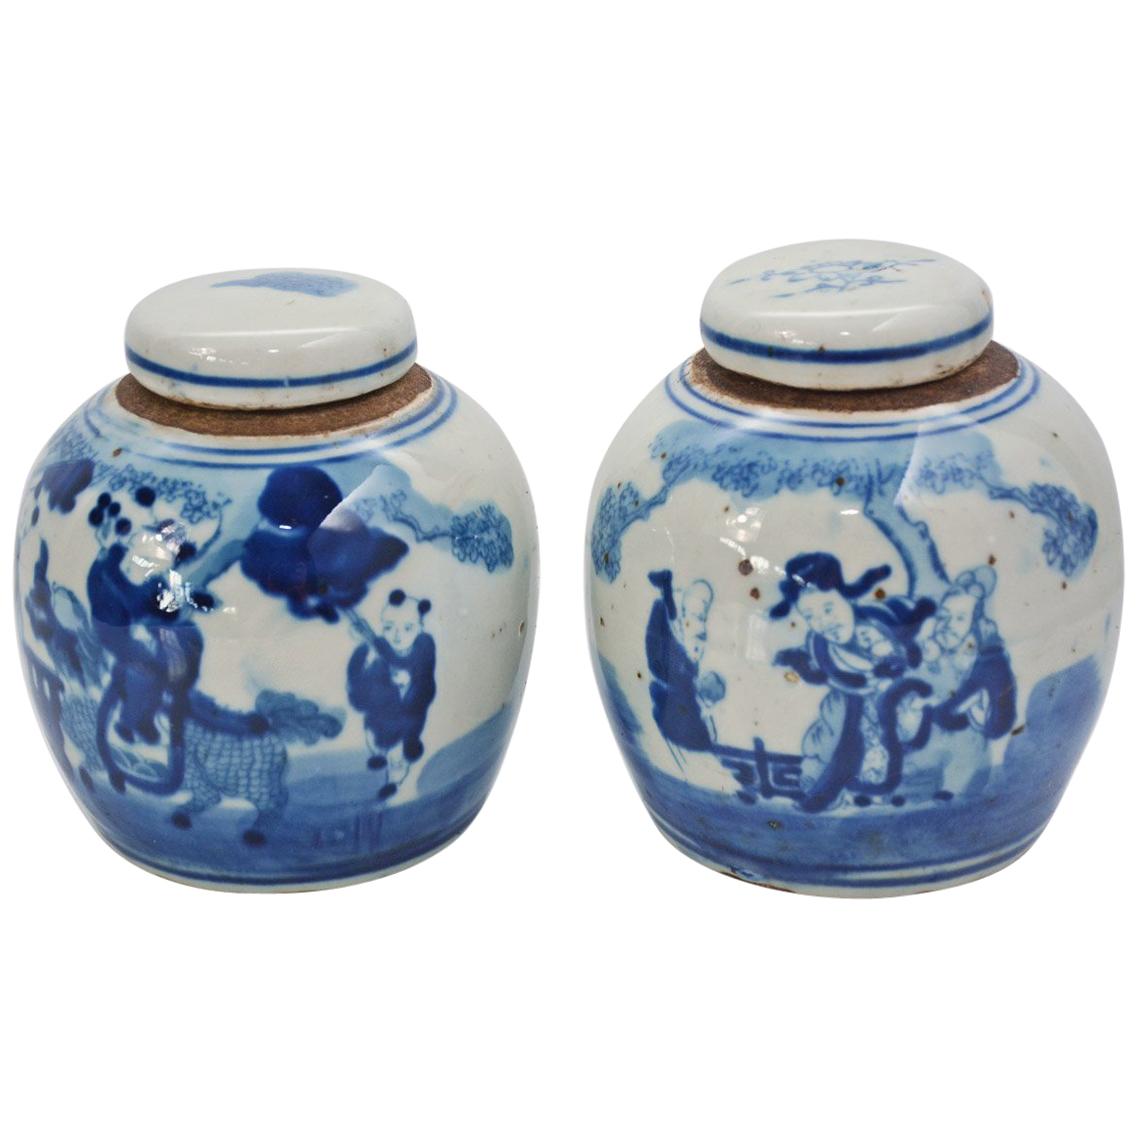 Pair of Petite 19th Century Blue and White Ginger Jars